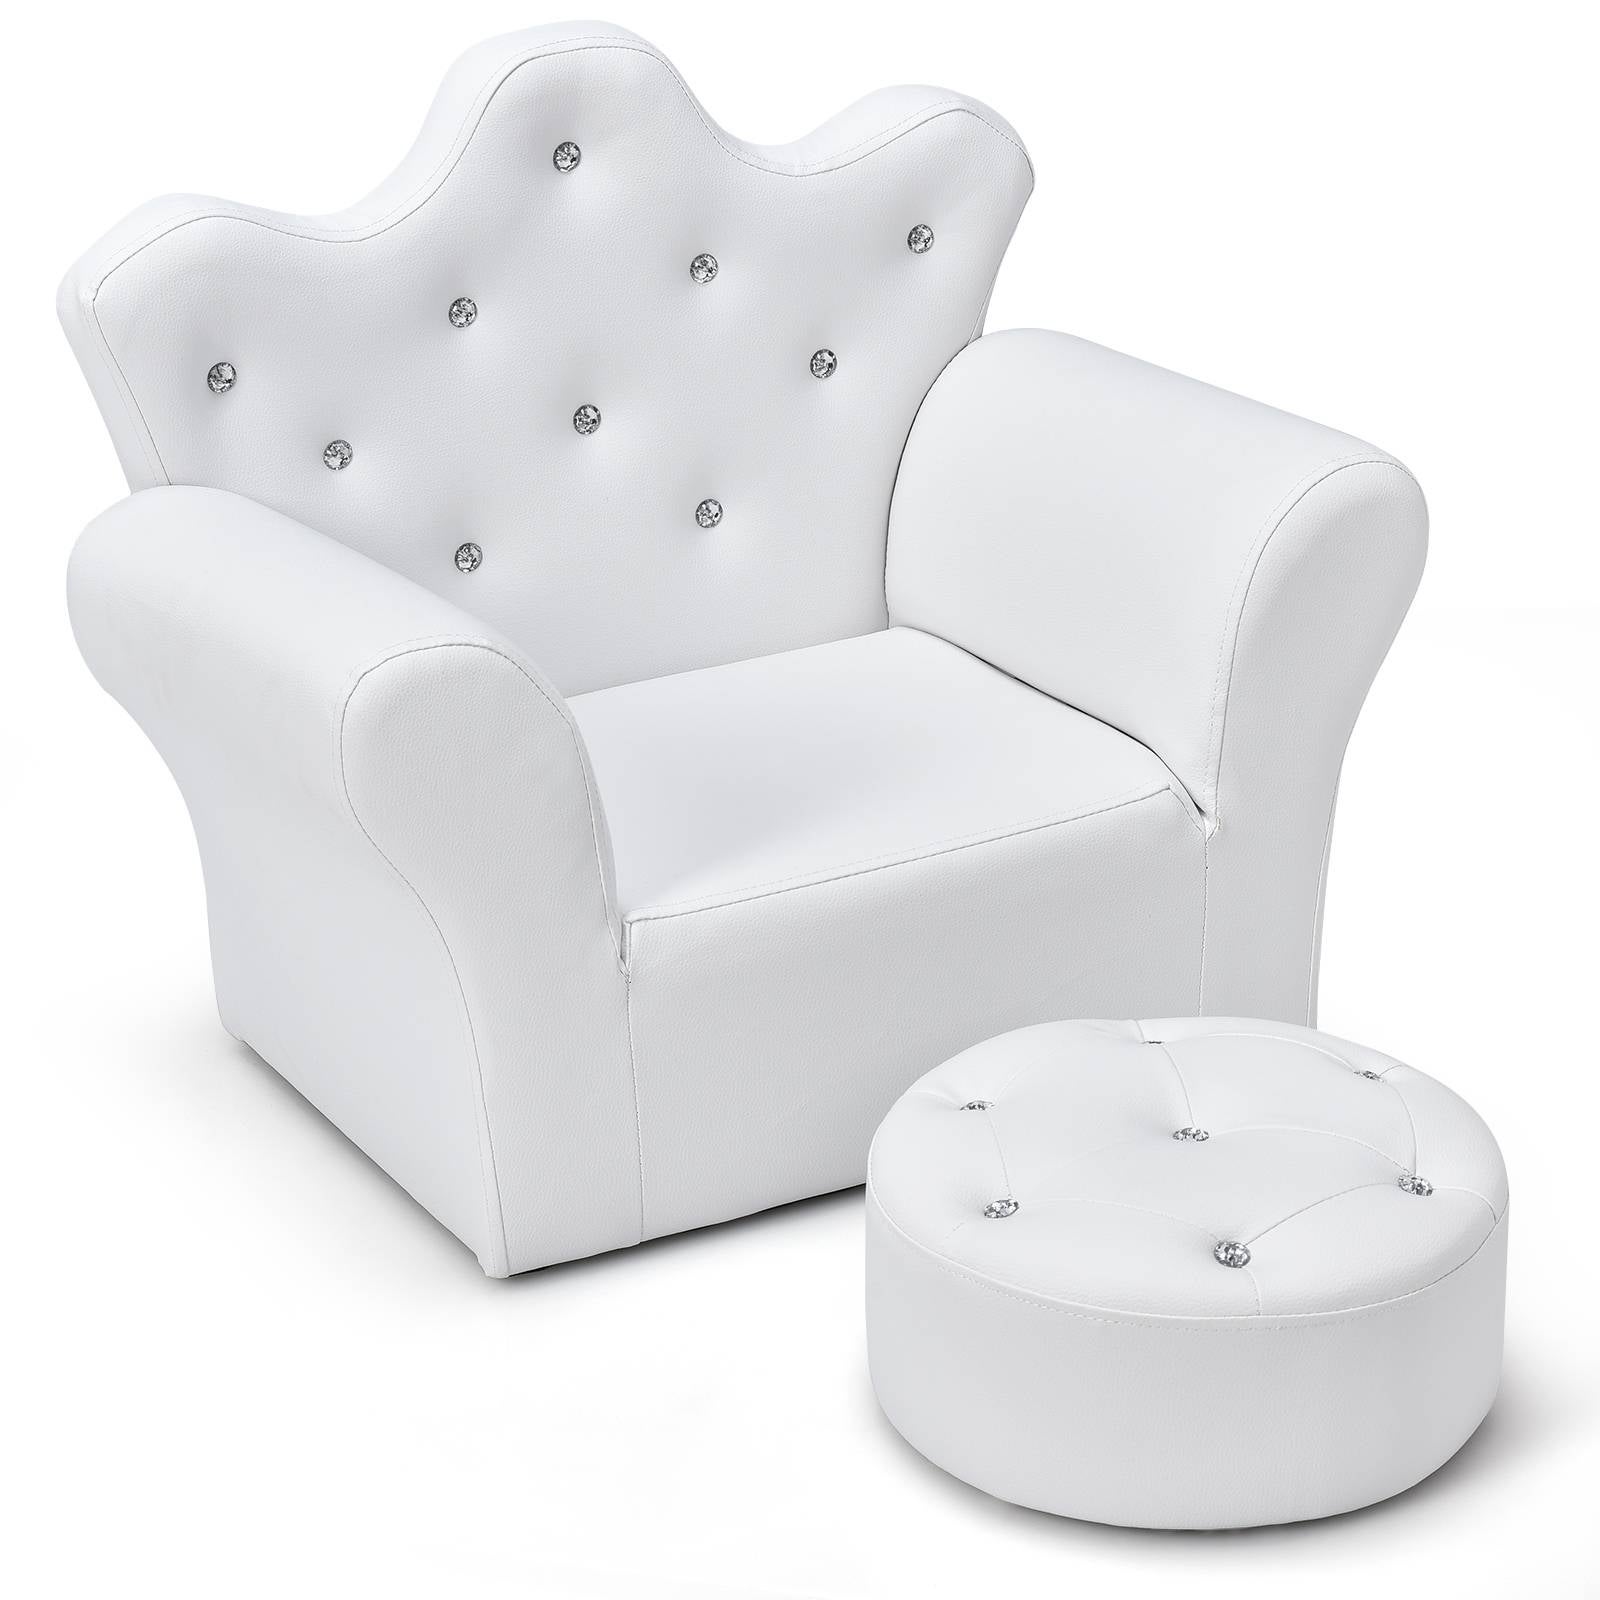 Costway Crystal Princess Kids Chair PVC Sofa Lounge Upholstered Armchair Couch Home Furniture w/Ottoman Bedroom Living Room White